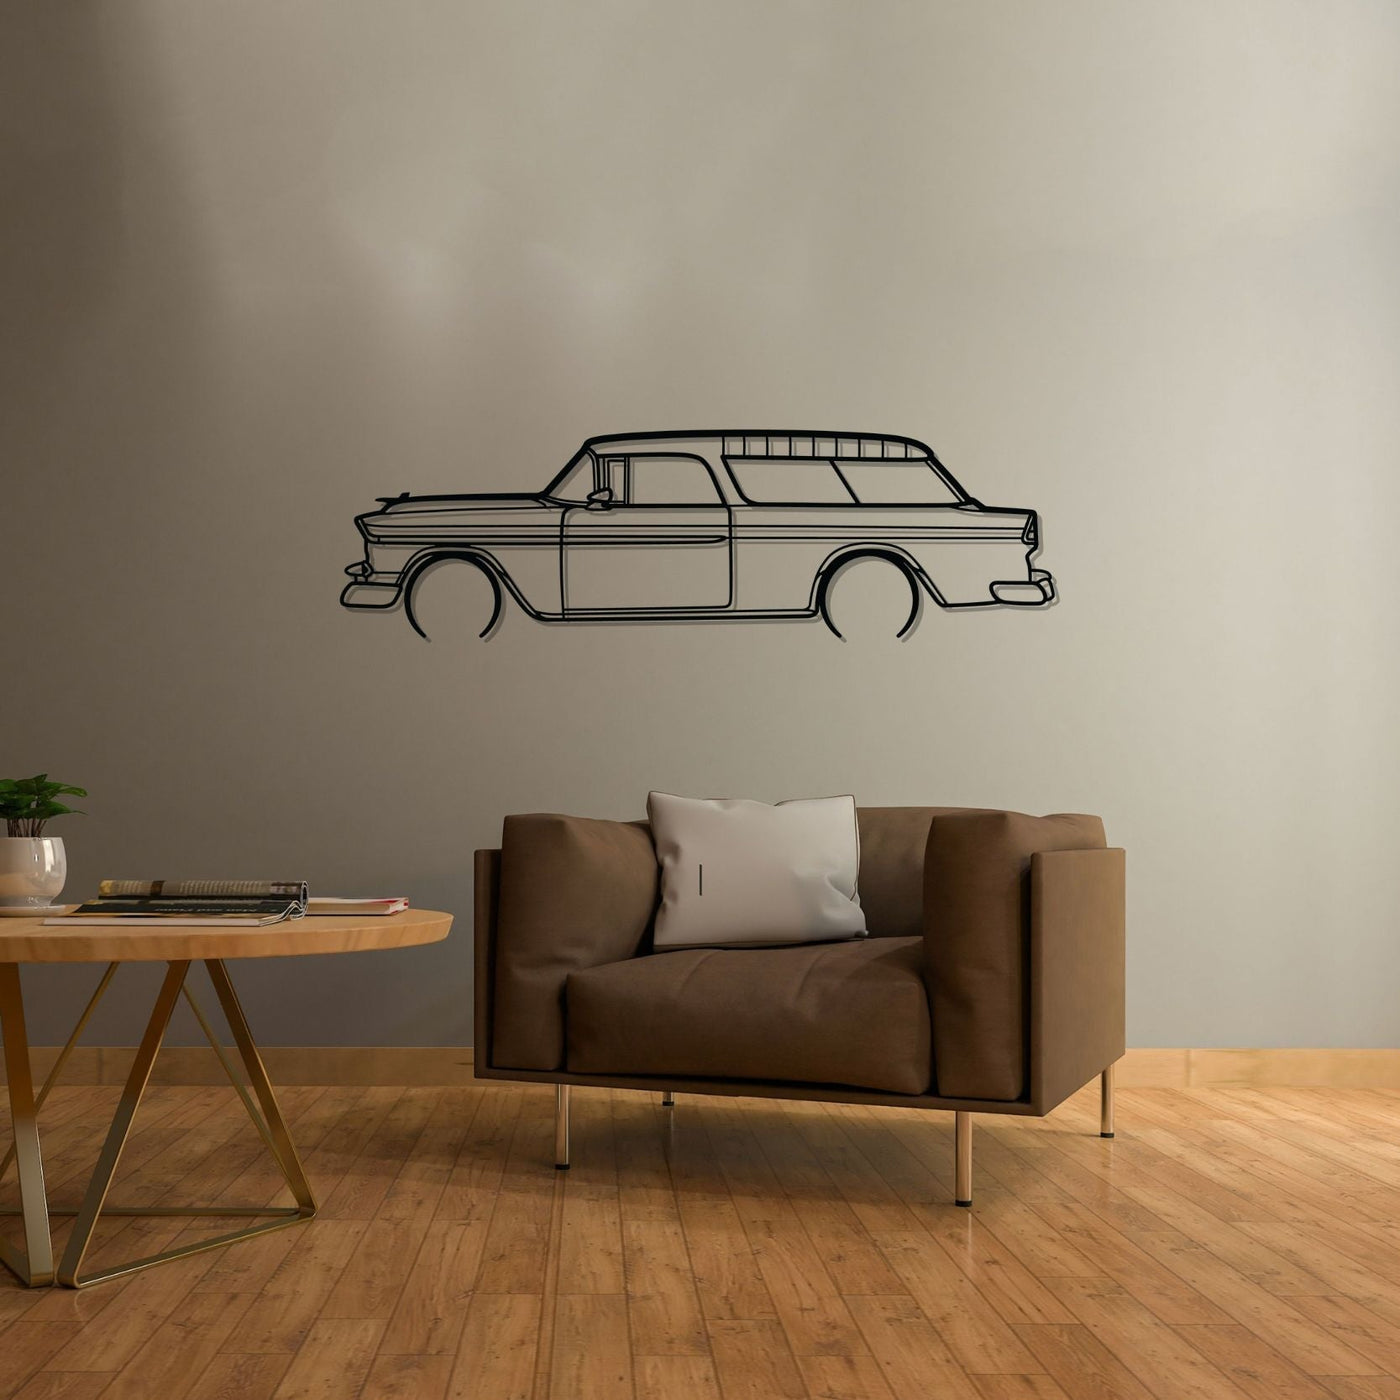 Nomad 1955 Detailed Silhouette Metal Wall Art